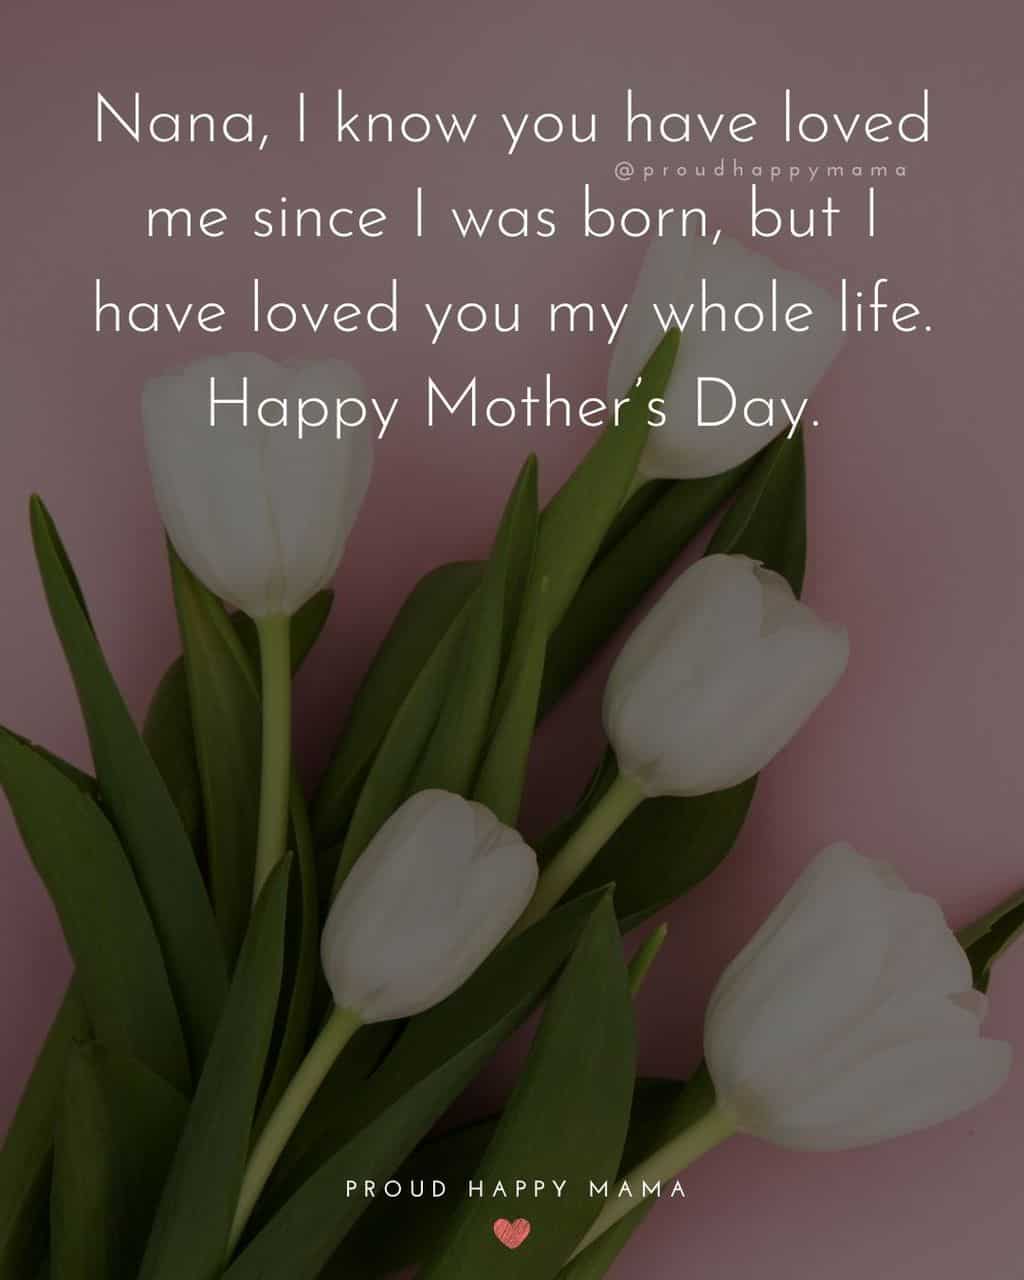 Happy Mothers Day Quotes To Grandma - Nana, I know you have loved me since I was born, but I have loved you my whole